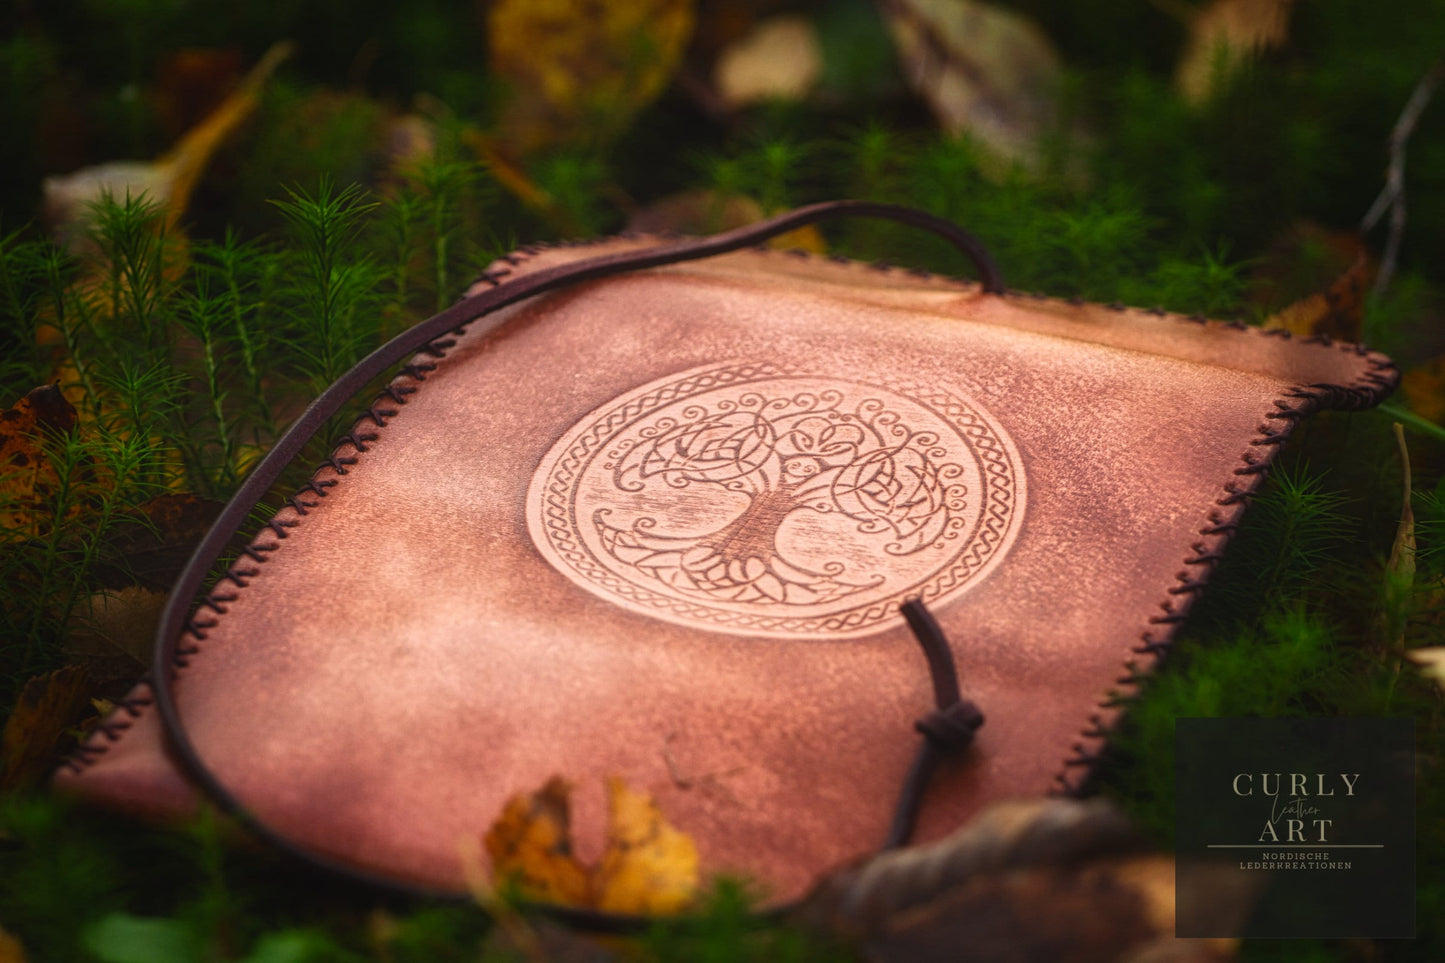 Tobacco pouch made of leather/tobacco pouch leather/tobacco pouch personalized/tobacco pouch Viking/tobacco pouch leather Tree of Life/Father's Day